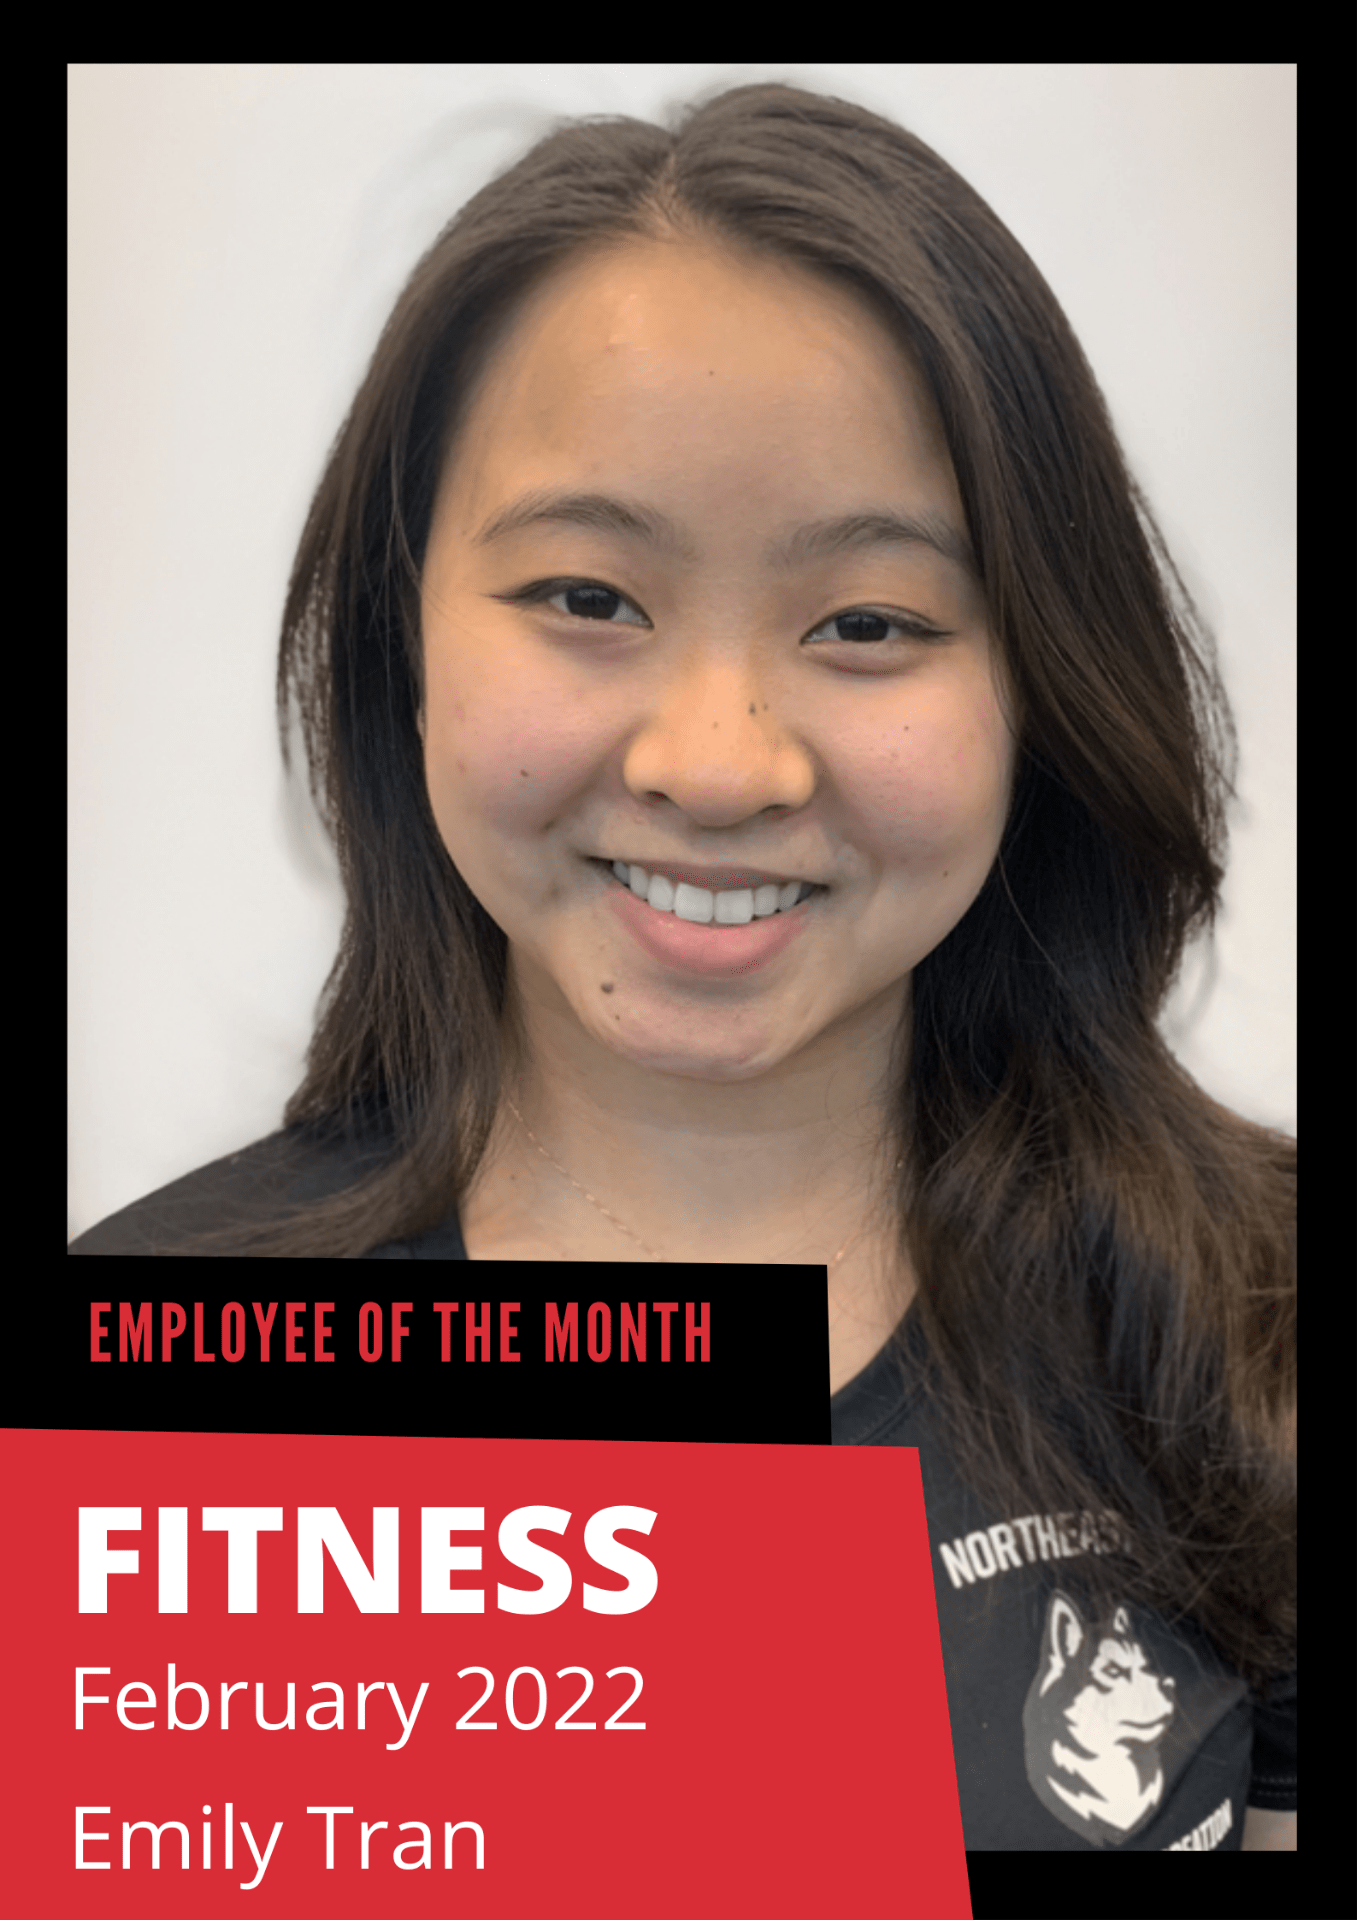 Employee of the Month, Fitness, February 2022, Emily Tran